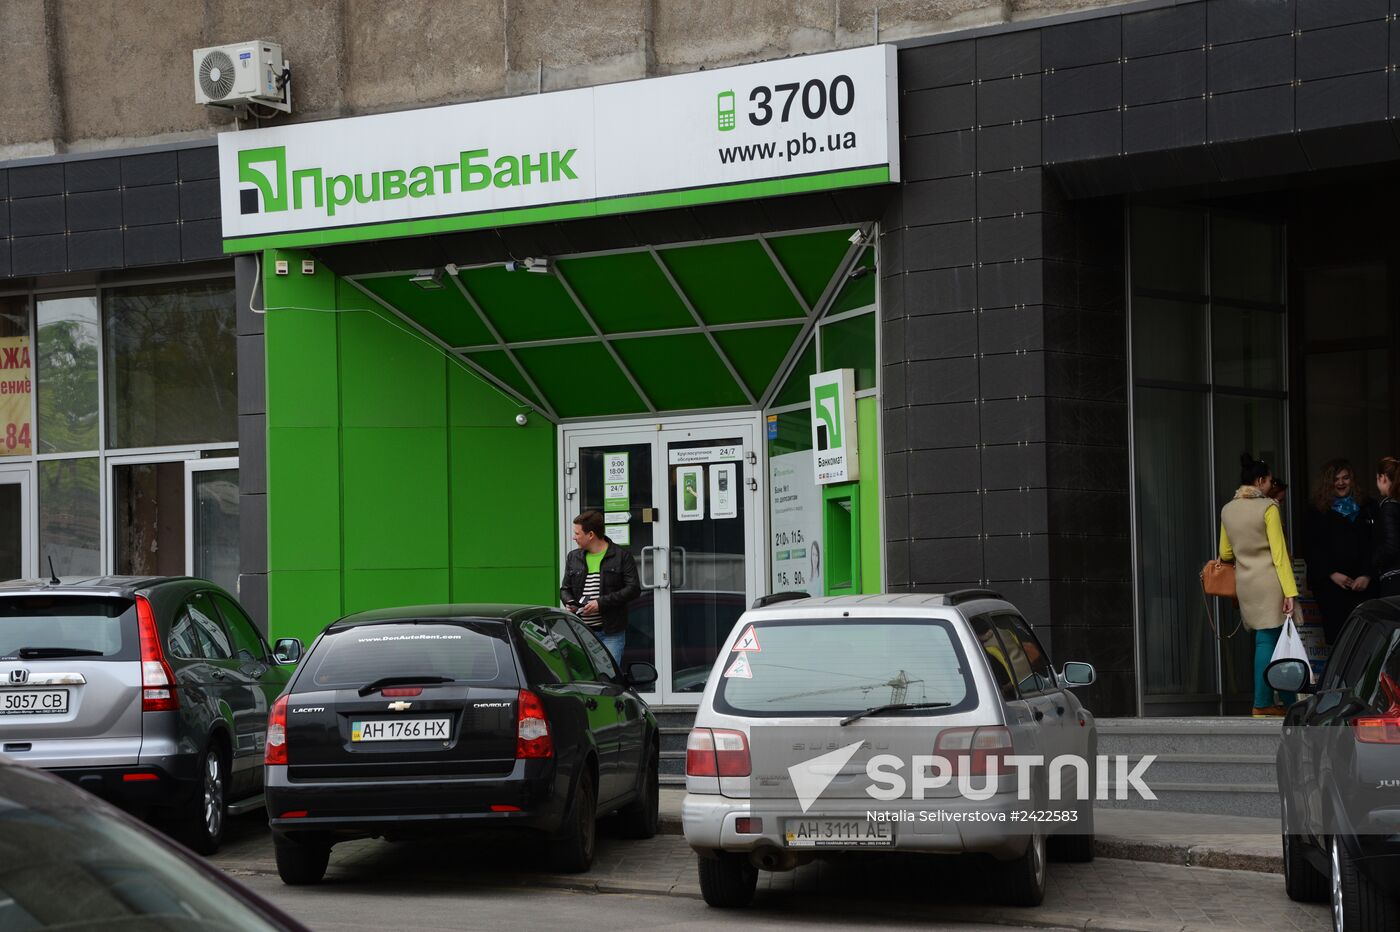 Office of PrivatBank in Donetsk